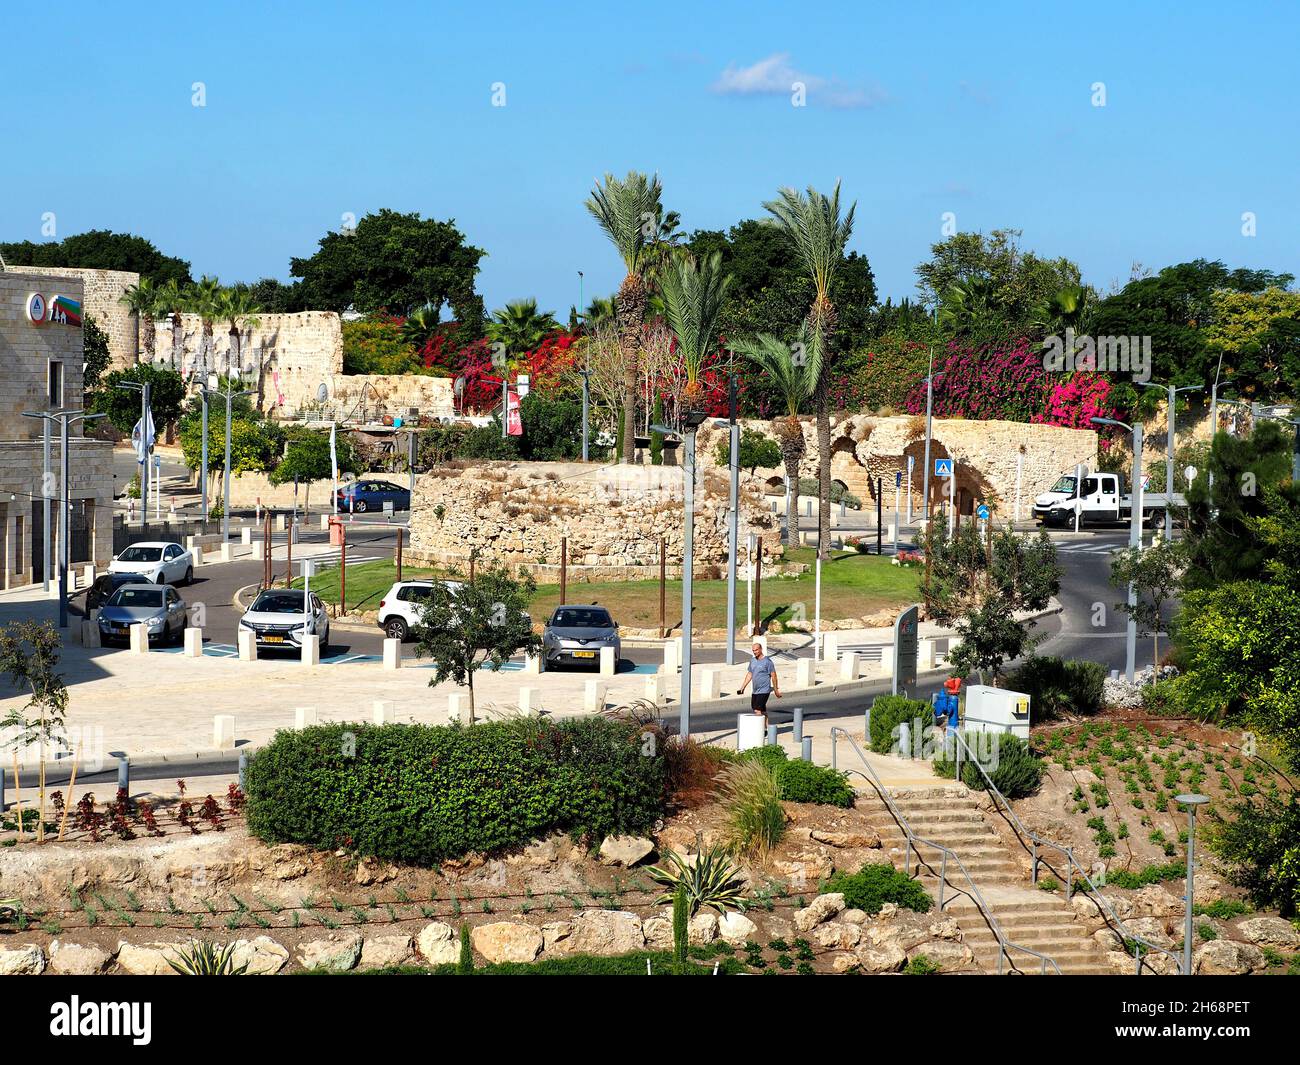 A beautiful square in the old city of Akko in Israel. Stock Photo